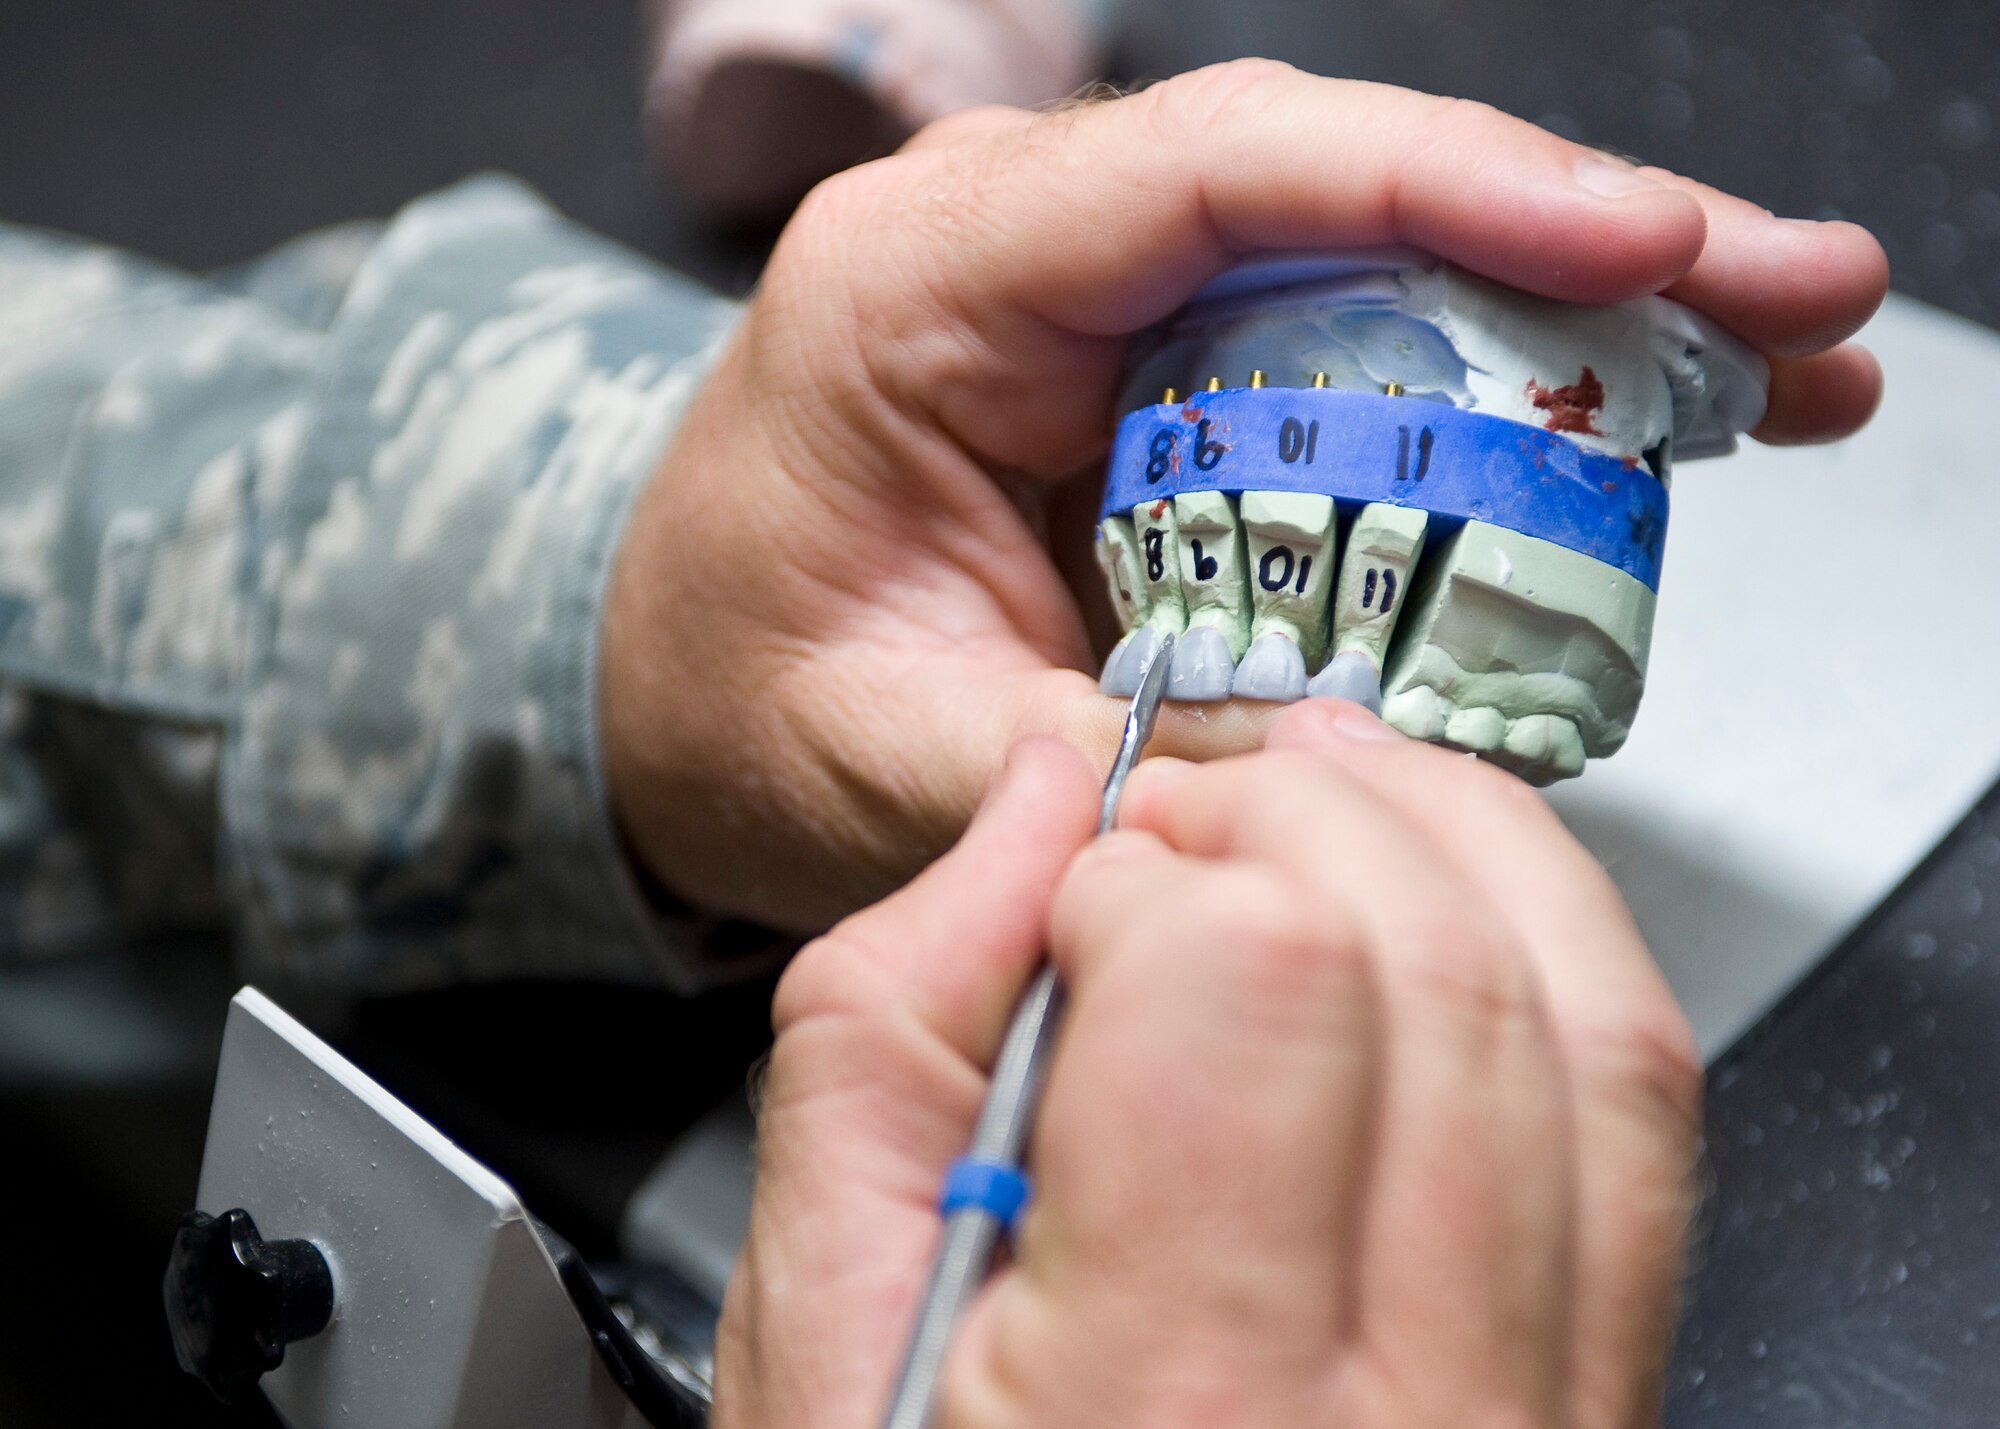 Master Sgt. Denny Shaffer, 2nd Dental Squadron laboratory flight chief, shapes molds of wax teeth in the new dental lab on Barksdale Air Force Base, La., May 22. When finished, these wax molds will be used to create artificial porcelain teeth for a patient. (U.S. Air Force photo/Staff Sgt. Chad Warren)(RELEASED)